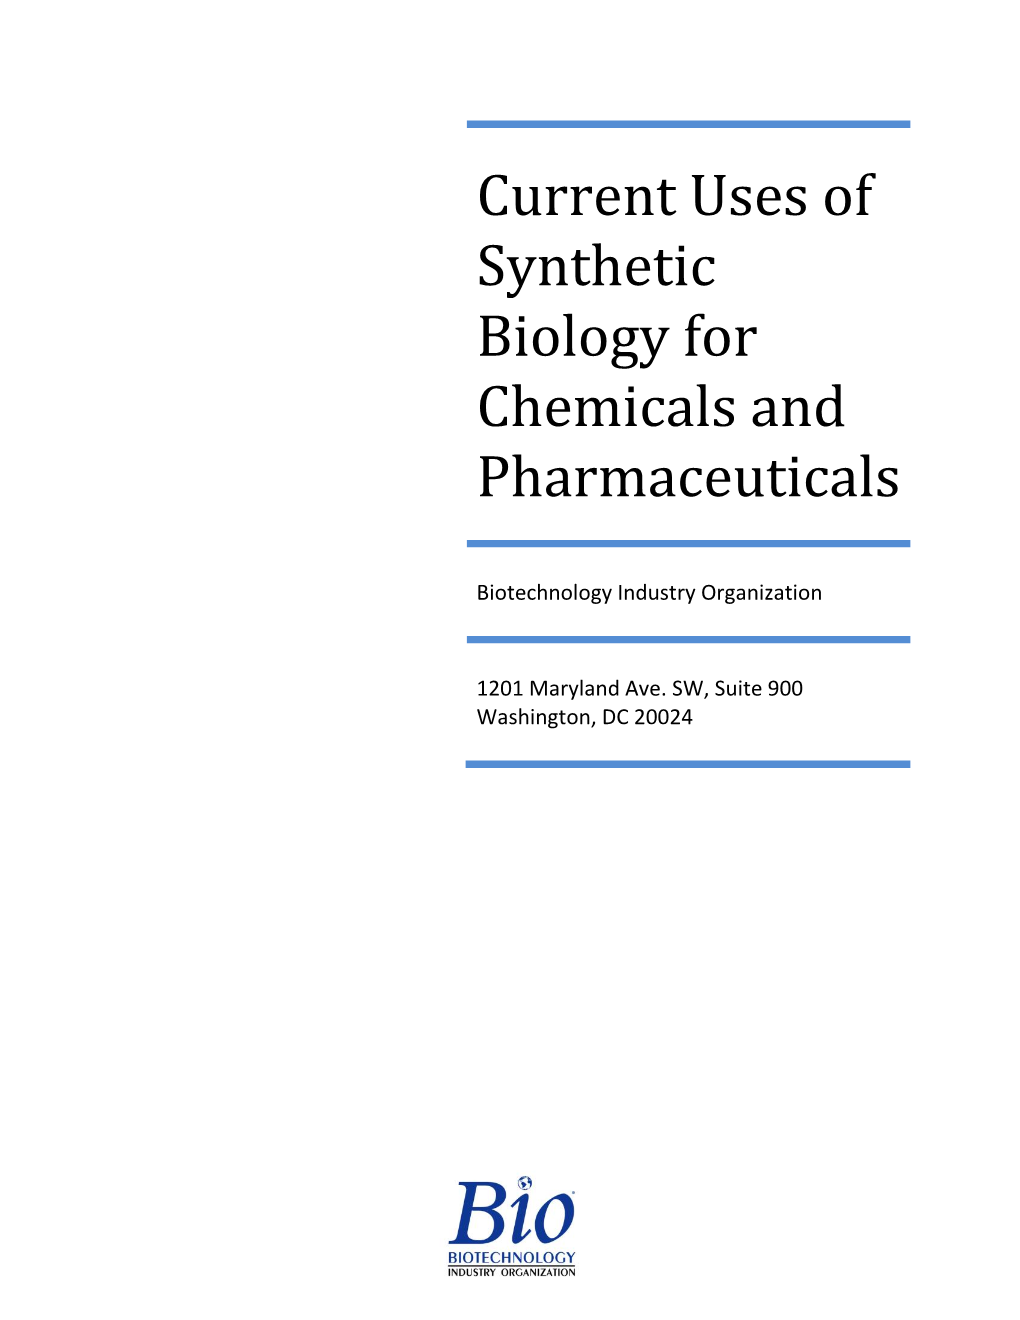 Current Uses of Synthetic Biology for Chemicals and Pharmaceuticals